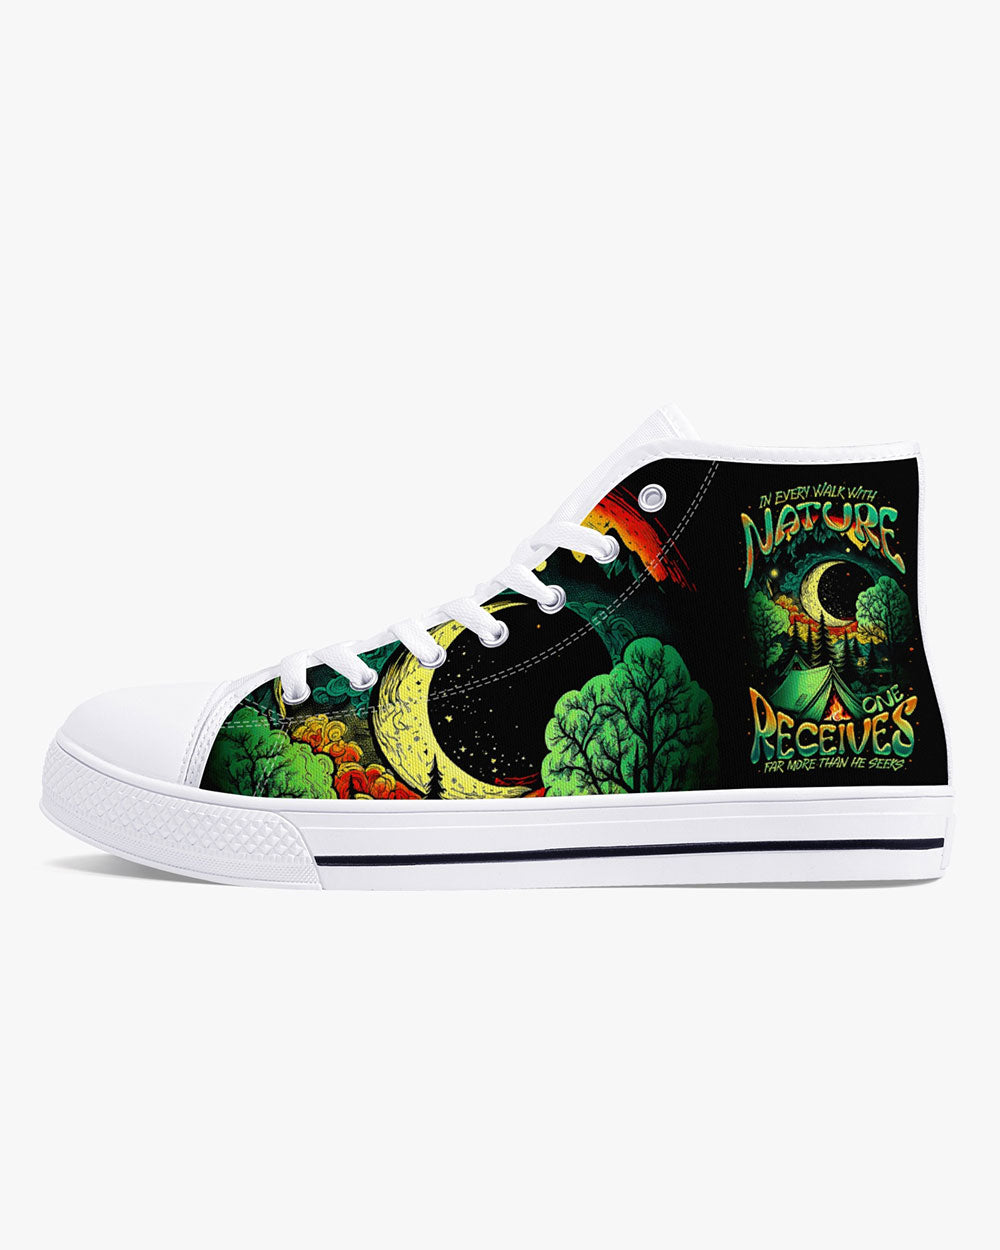 IN EVERY WALK WITH NATURE HIGH TOP CANVAS SHOES - TY2804233